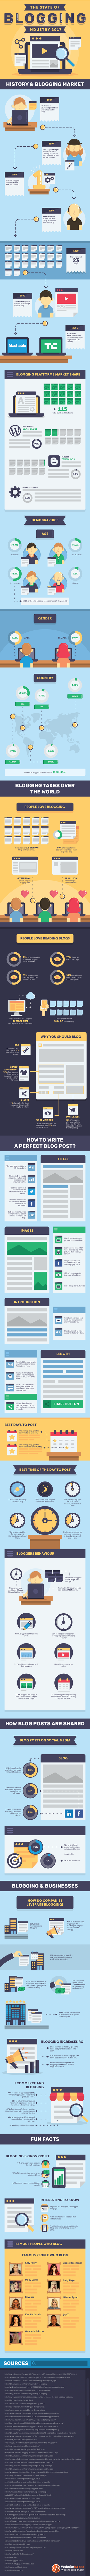 infographic-blogging.png